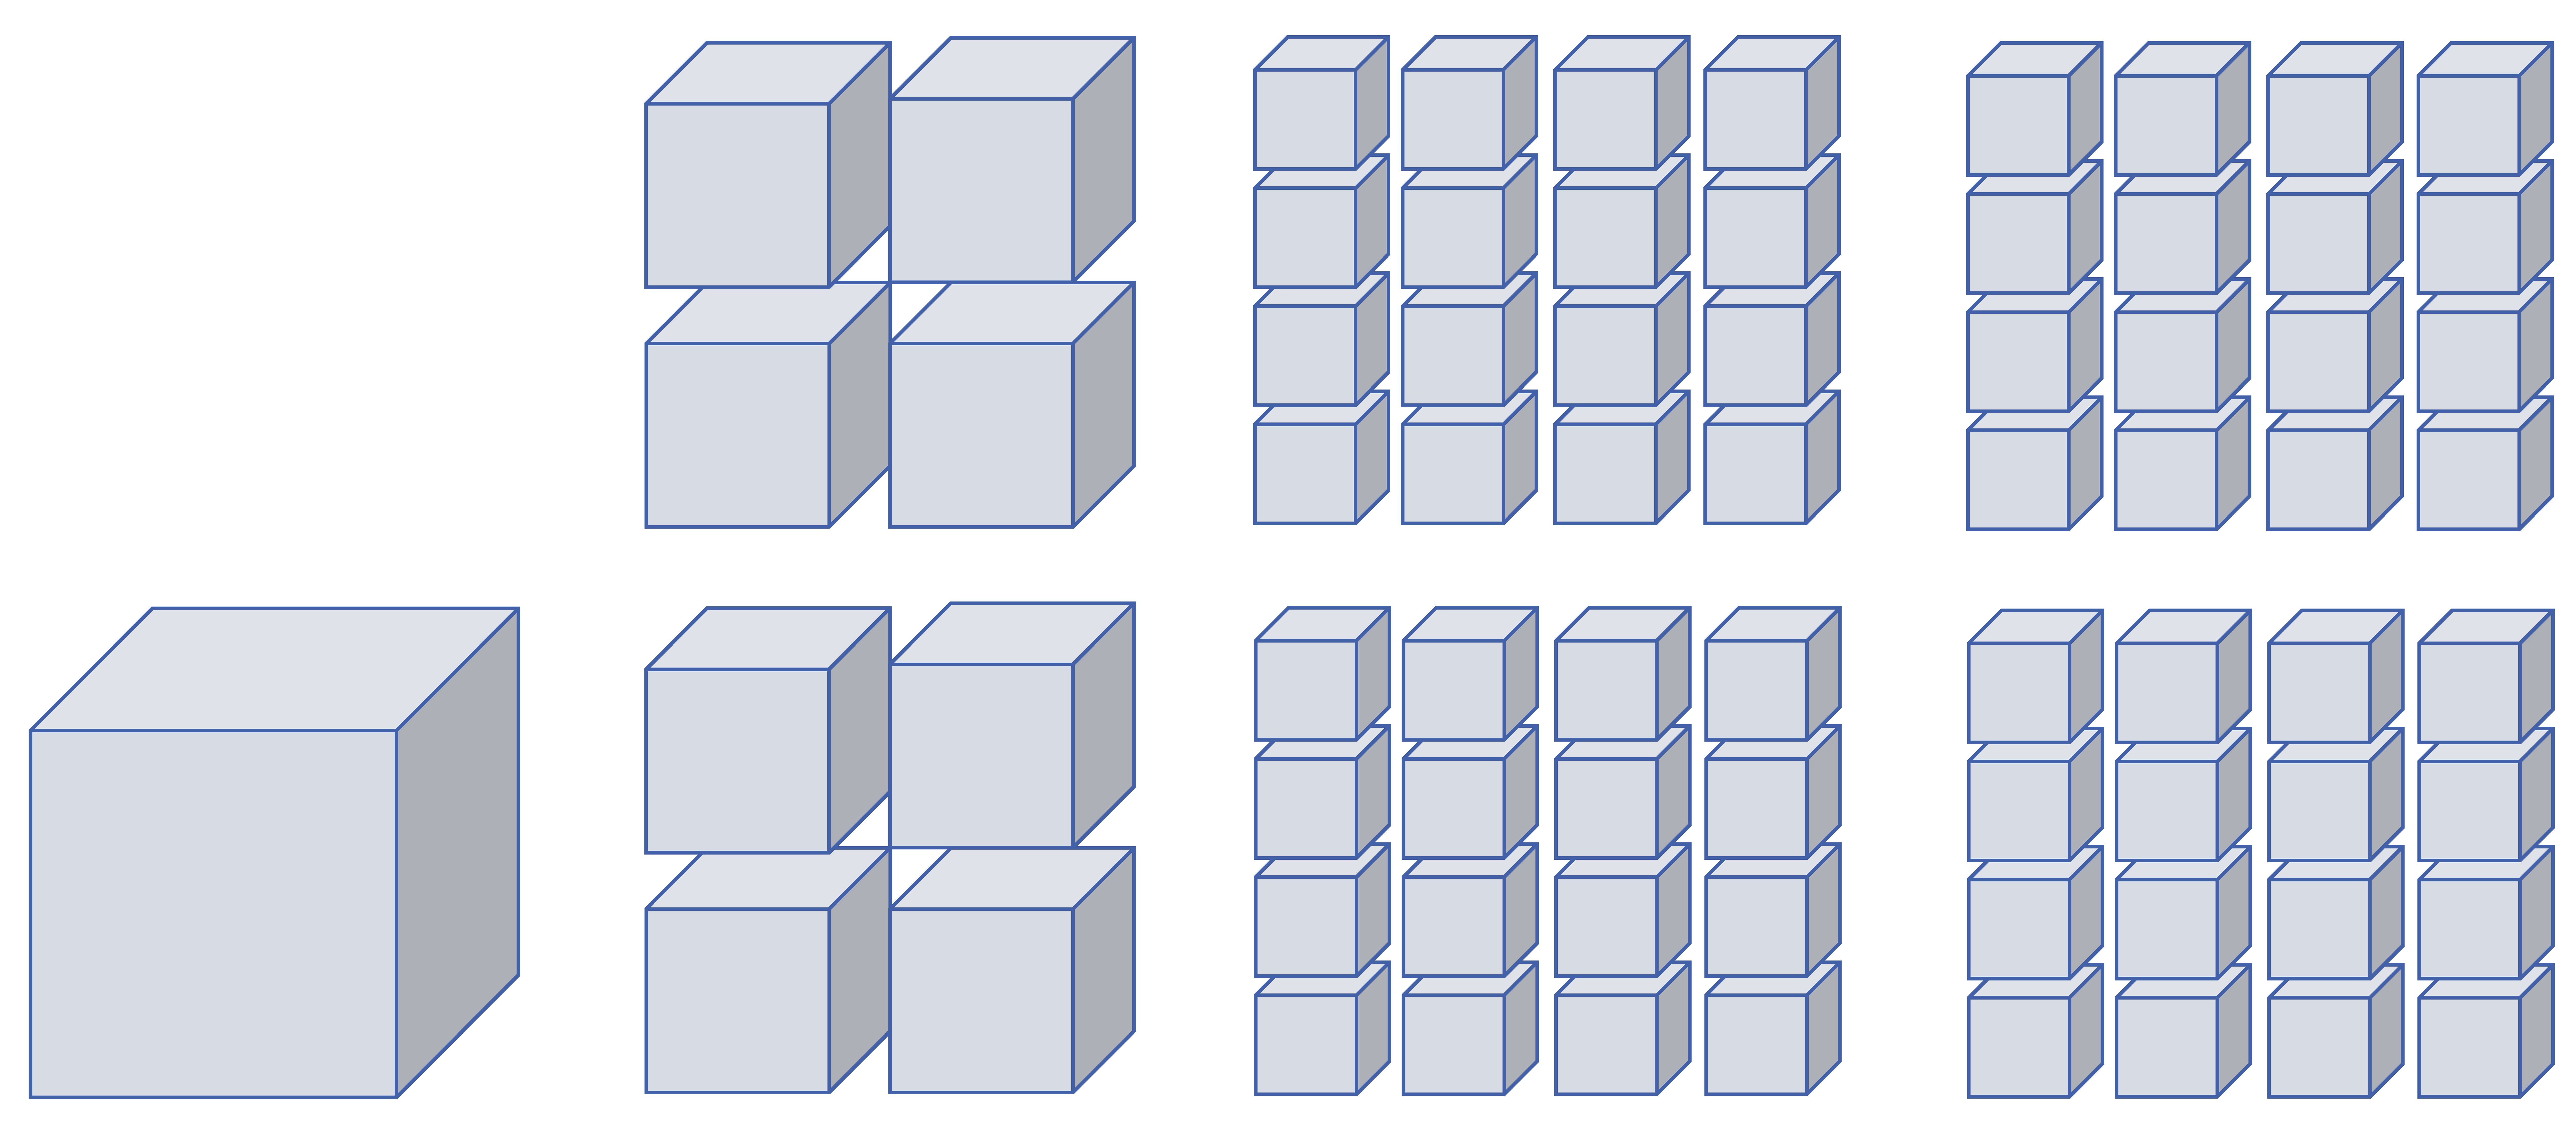 The left side has one large cube, the middle has 8 medium cubes, the right side has 64 small cubes. Each group has the same overall volume.